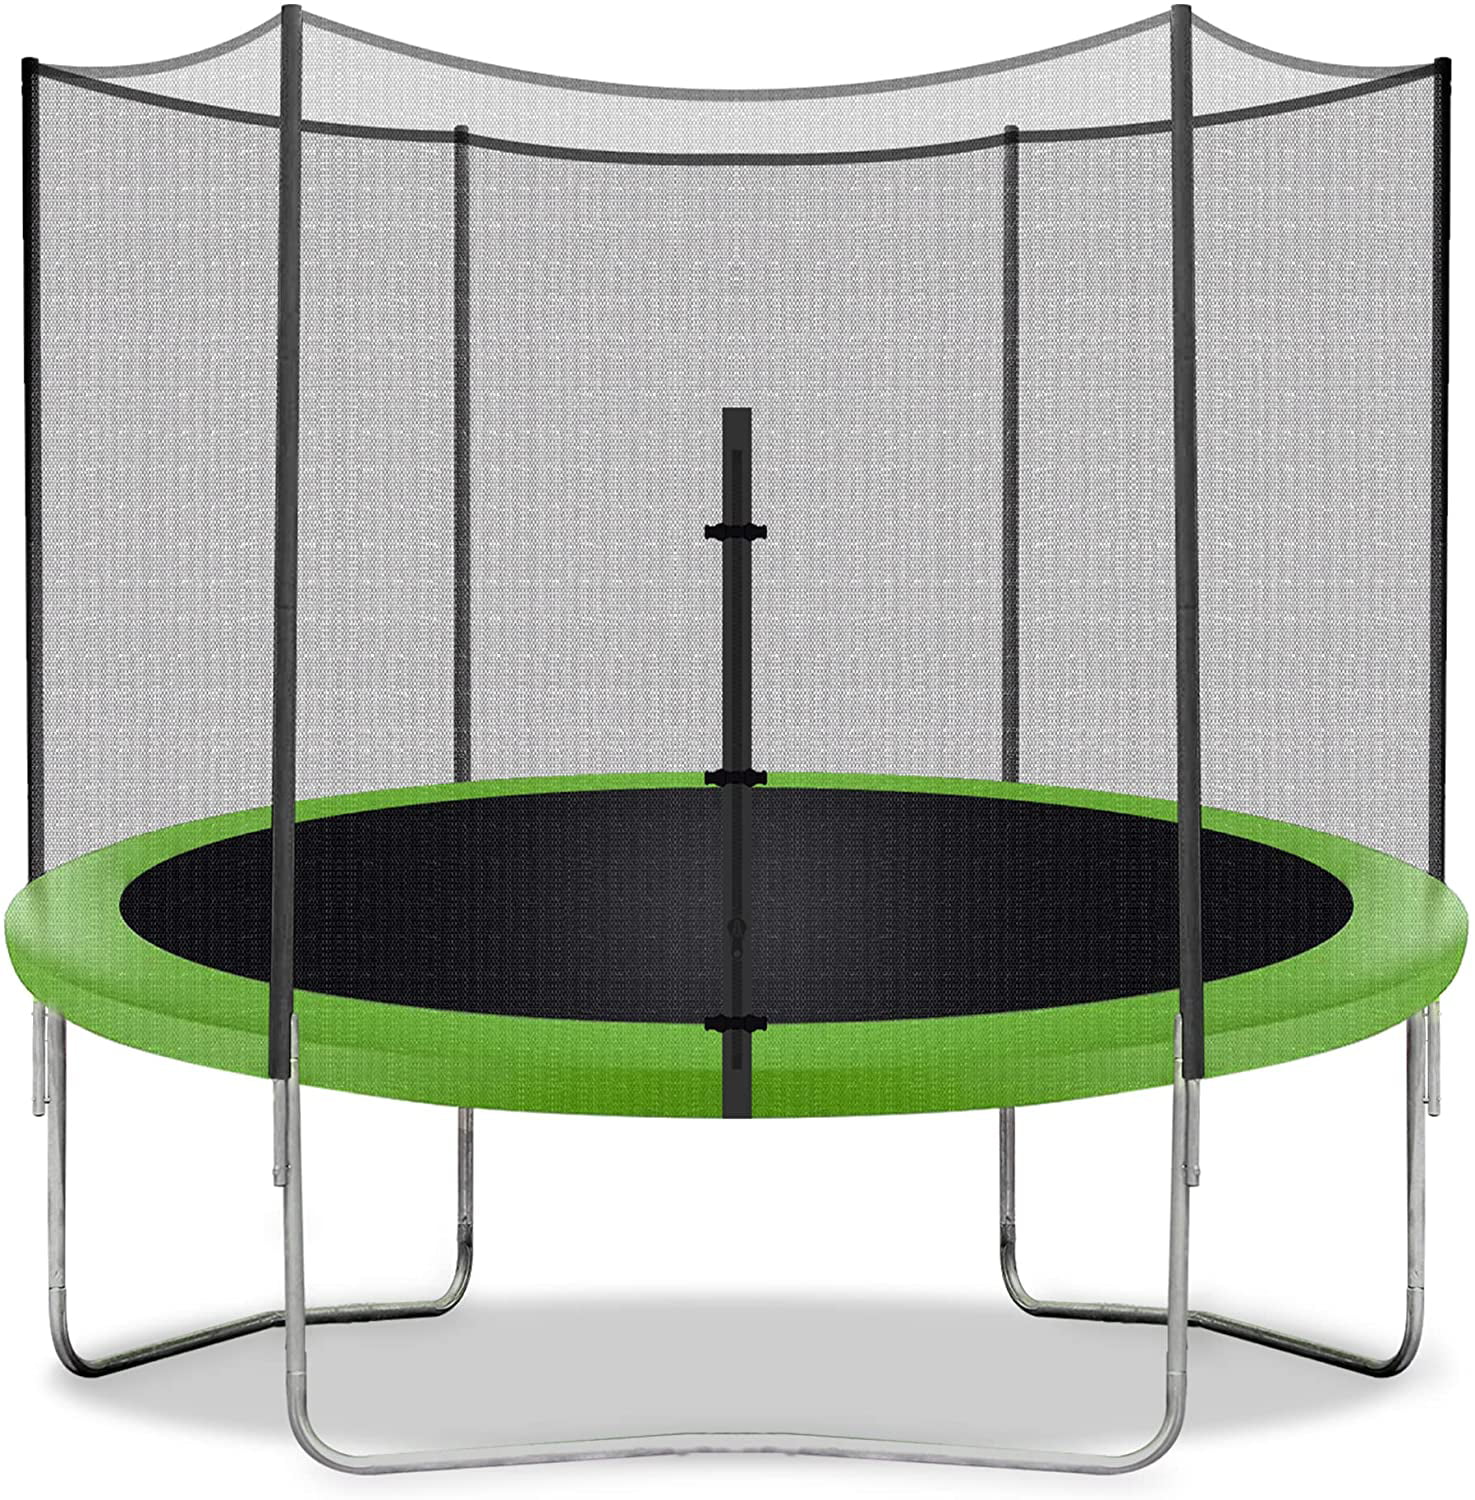 8FT Trampoline Combo Bounce Jump Safety Enclosure Net w/ Spring Pad Ladder Jumpe 